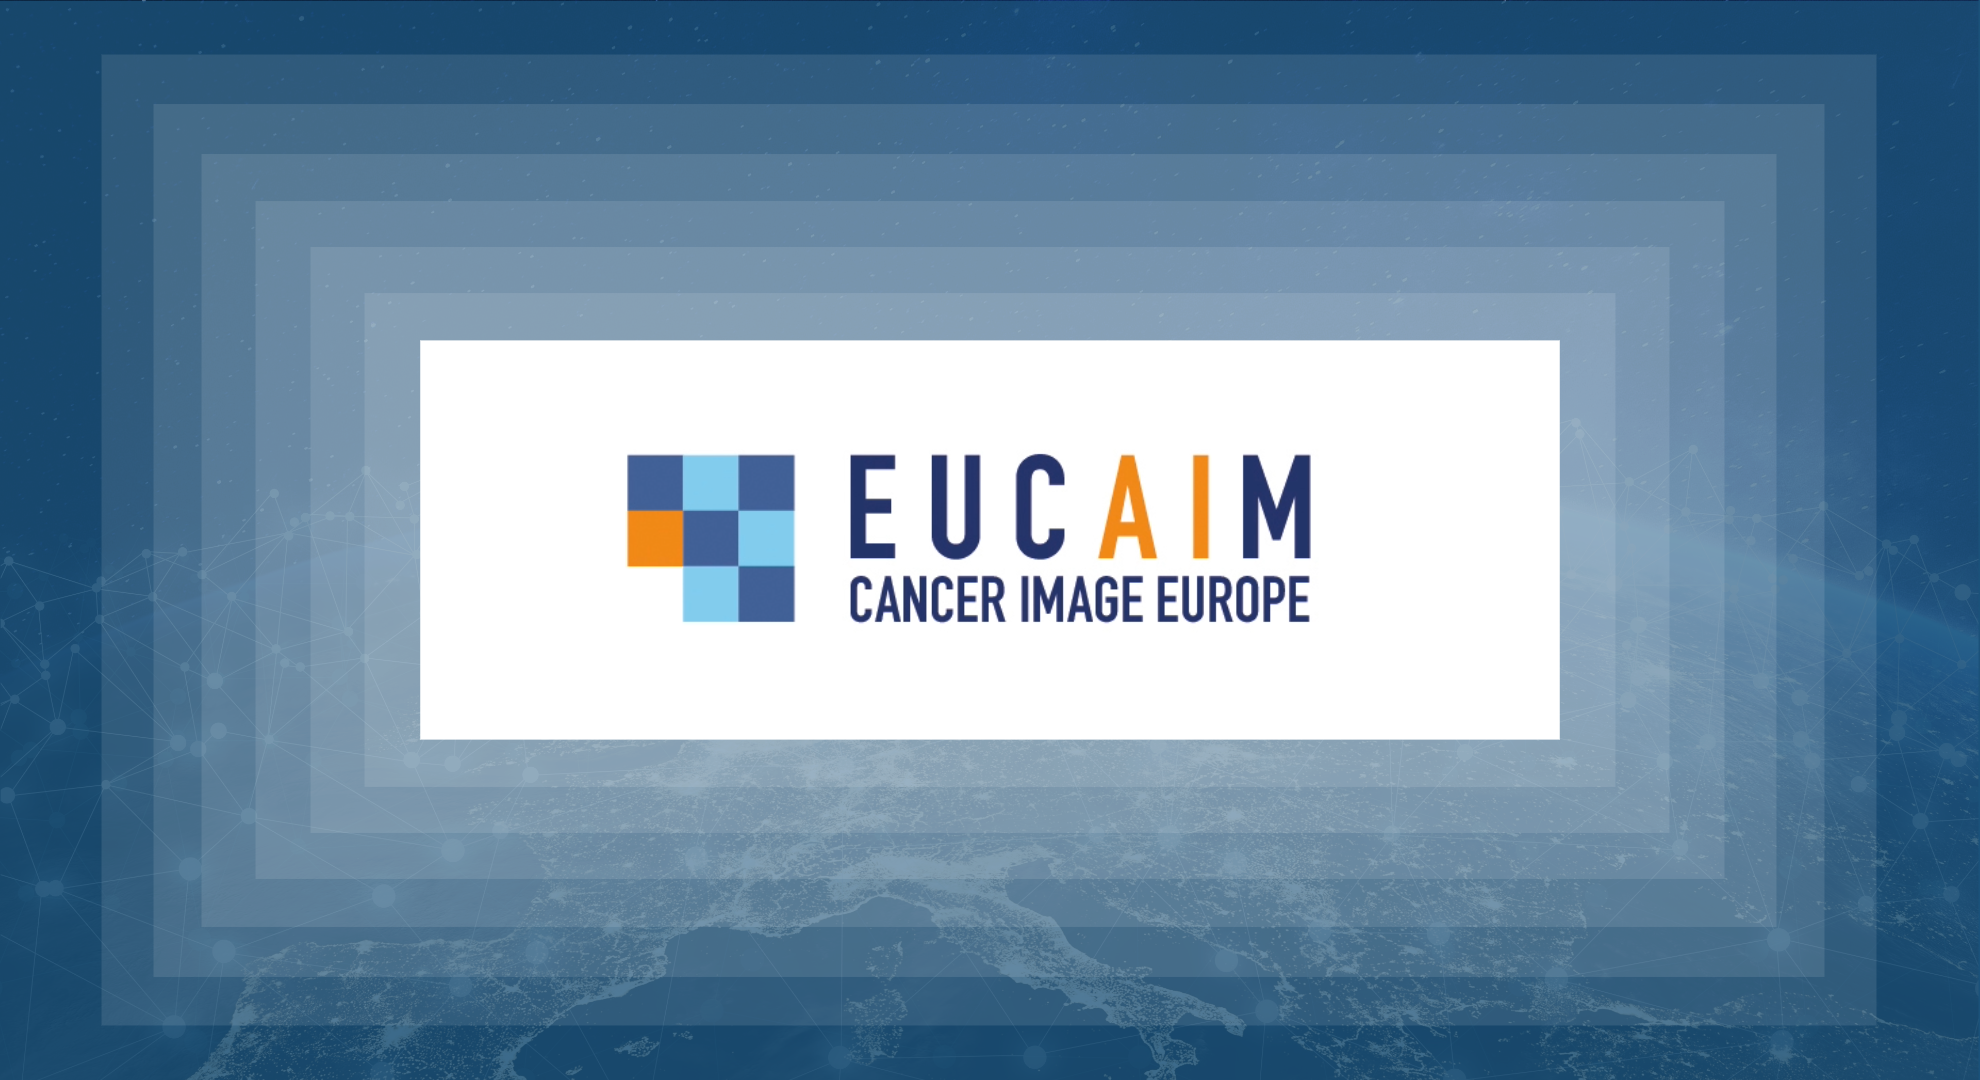 Discover Cancer Image Europe, the first release of the EUCAIM platform to fuel cancer research and data sharing main image